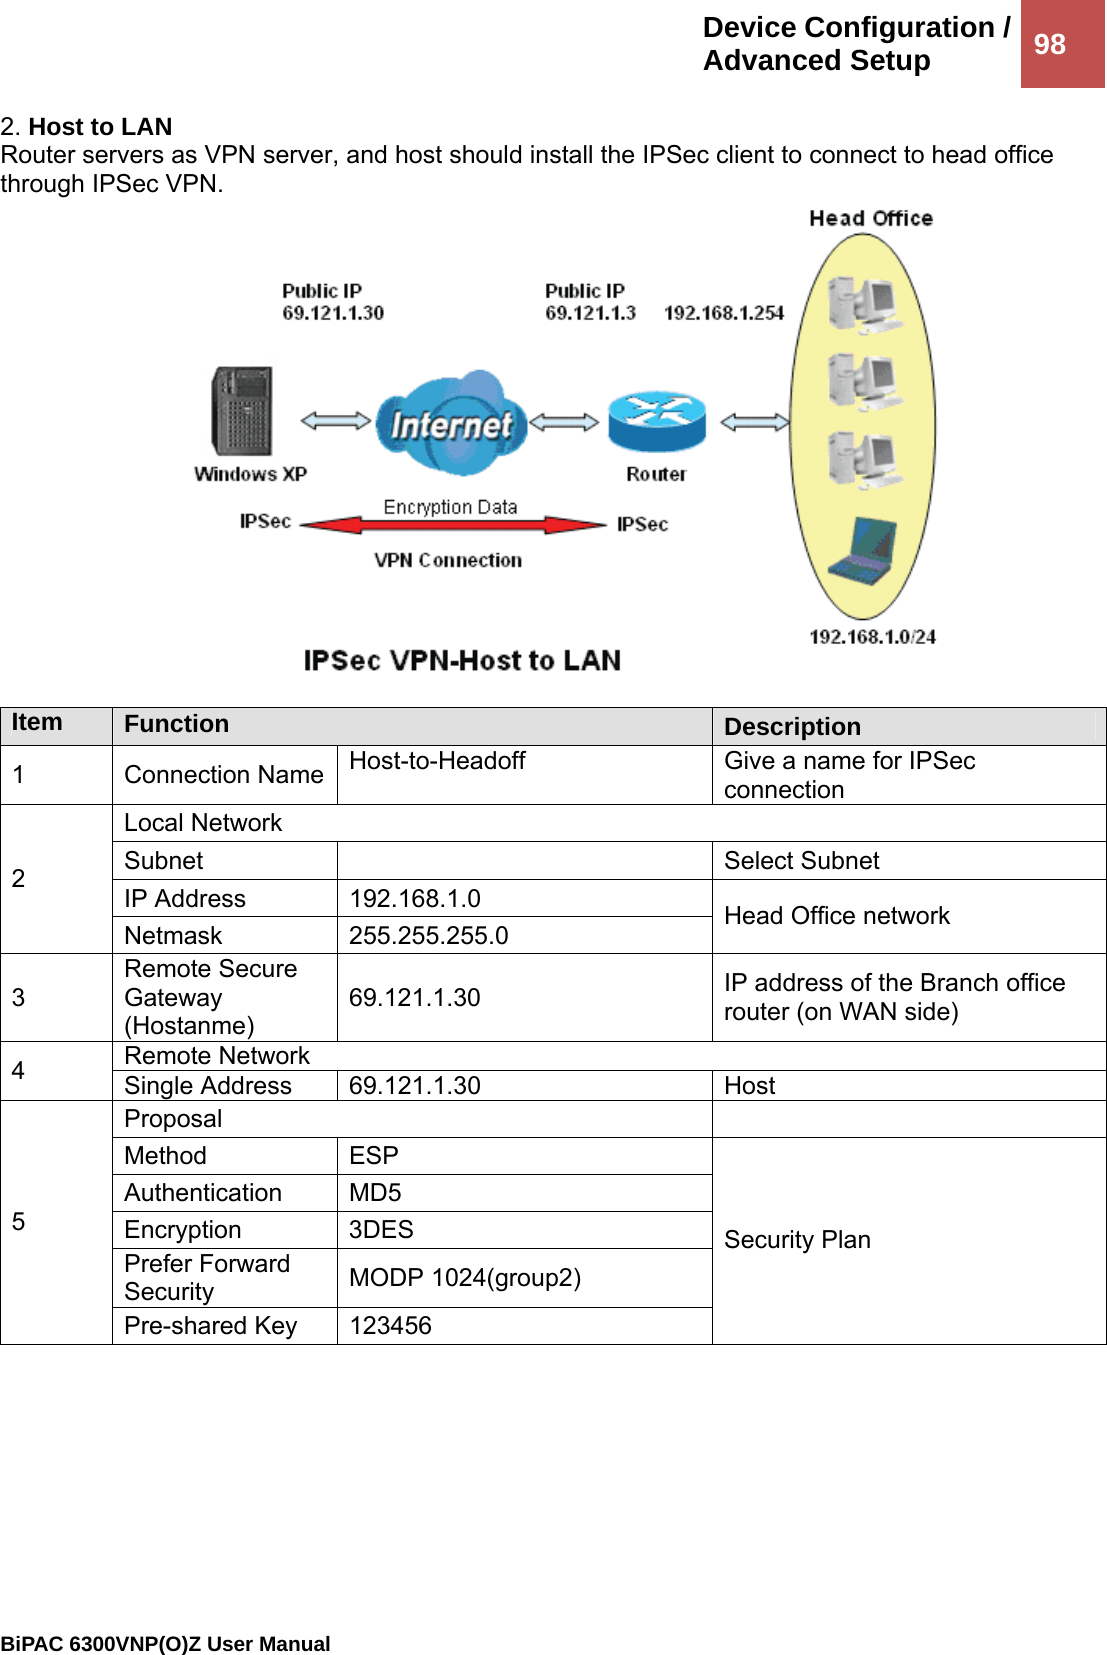 Device Configuration /Advanced Setup  98                                                BiPAC 6300VNP(O)Z User Manual  2. Host to LAN Router servers as VPN server, and host should install the IPSec client to connect to head office through IPSec VPN.   Item  Function  Description 1 Connection Name Host-to-Headoff  Give a name for IPSec connection Local Network Subnet    Select Subnet  IP Address  192.168.1.0 2 Netmask 255.255.255.0  Head Office network 3 Remote Secure Gateway (Hostanme) 69.121.1.30  IP address of the Branch office router (on WAN side) Remote Network 4  Single Address  69.121.1.30  Host  Proposal  Method   ESP Authentication MD5 Encryption   3DES Prefer Forward Security   MODP 1024(group2) 5 Pre-shared Key  123456 Security Plan  